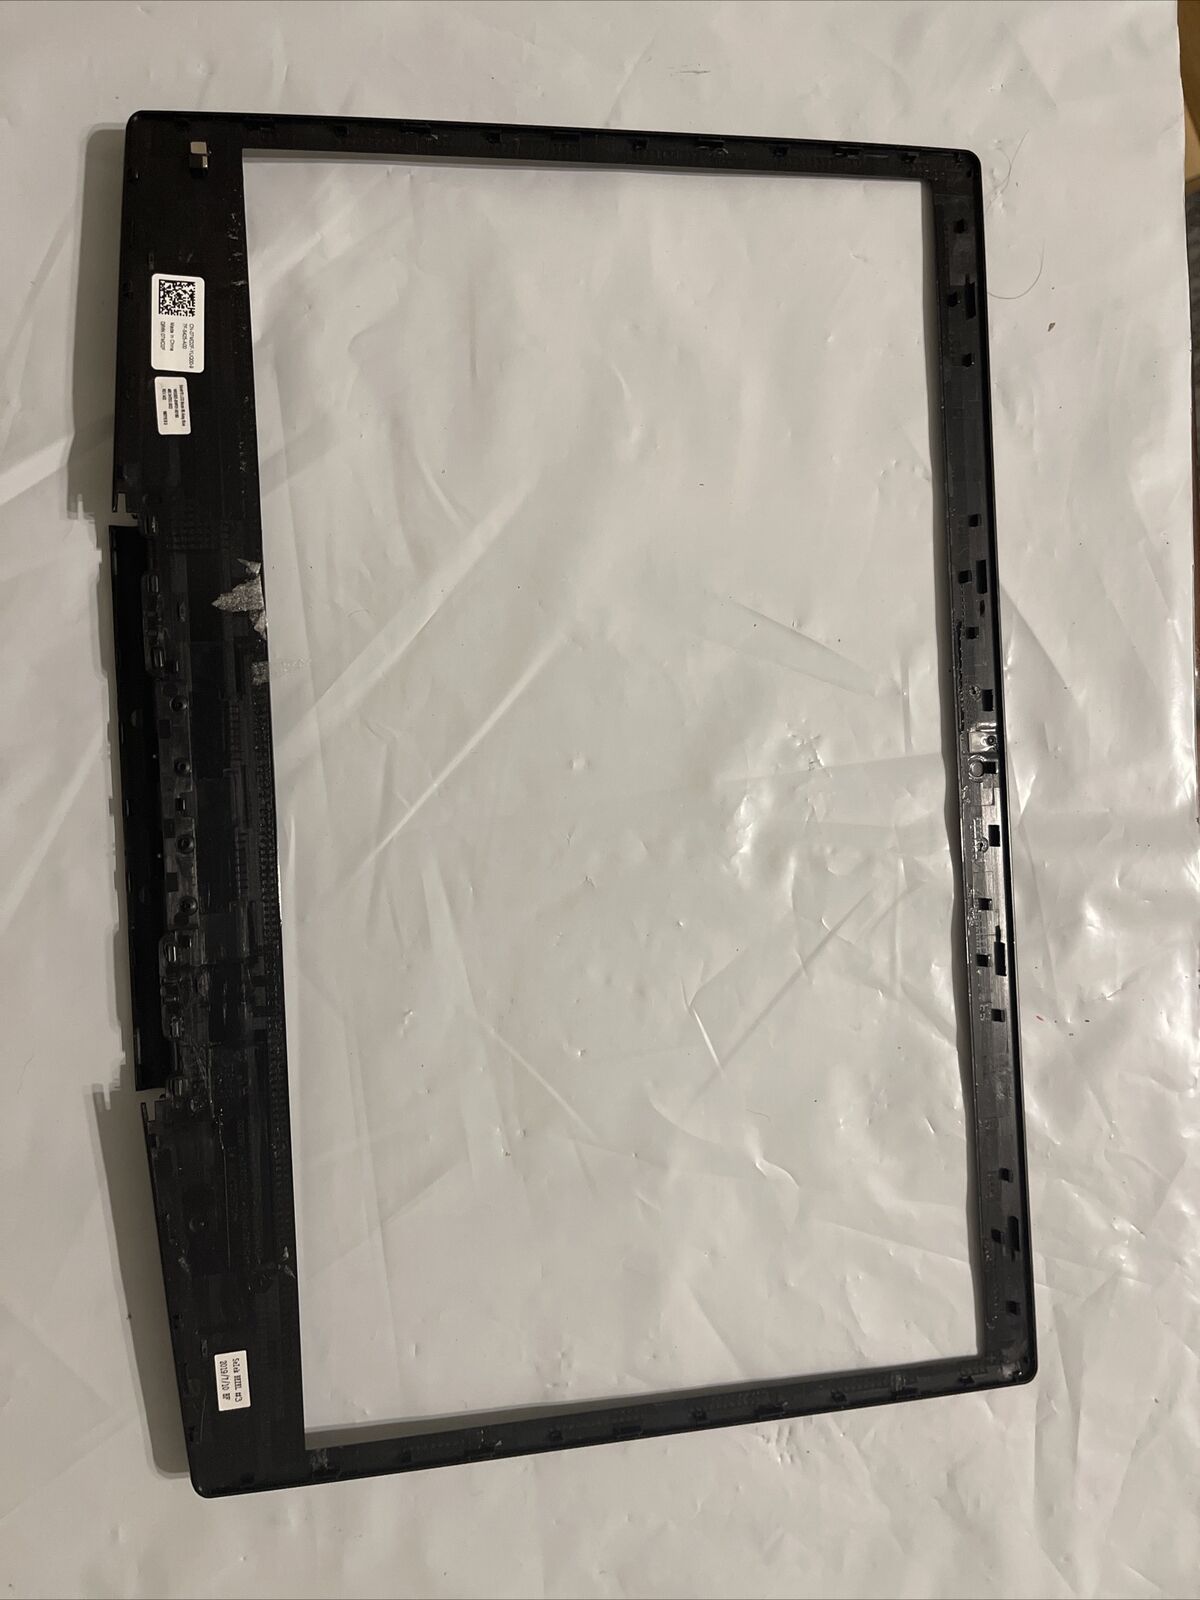 OEM Dell G Series G3 3590 LCD Front Bezel Plastic Trim Cover -No-TS-  7MD2F